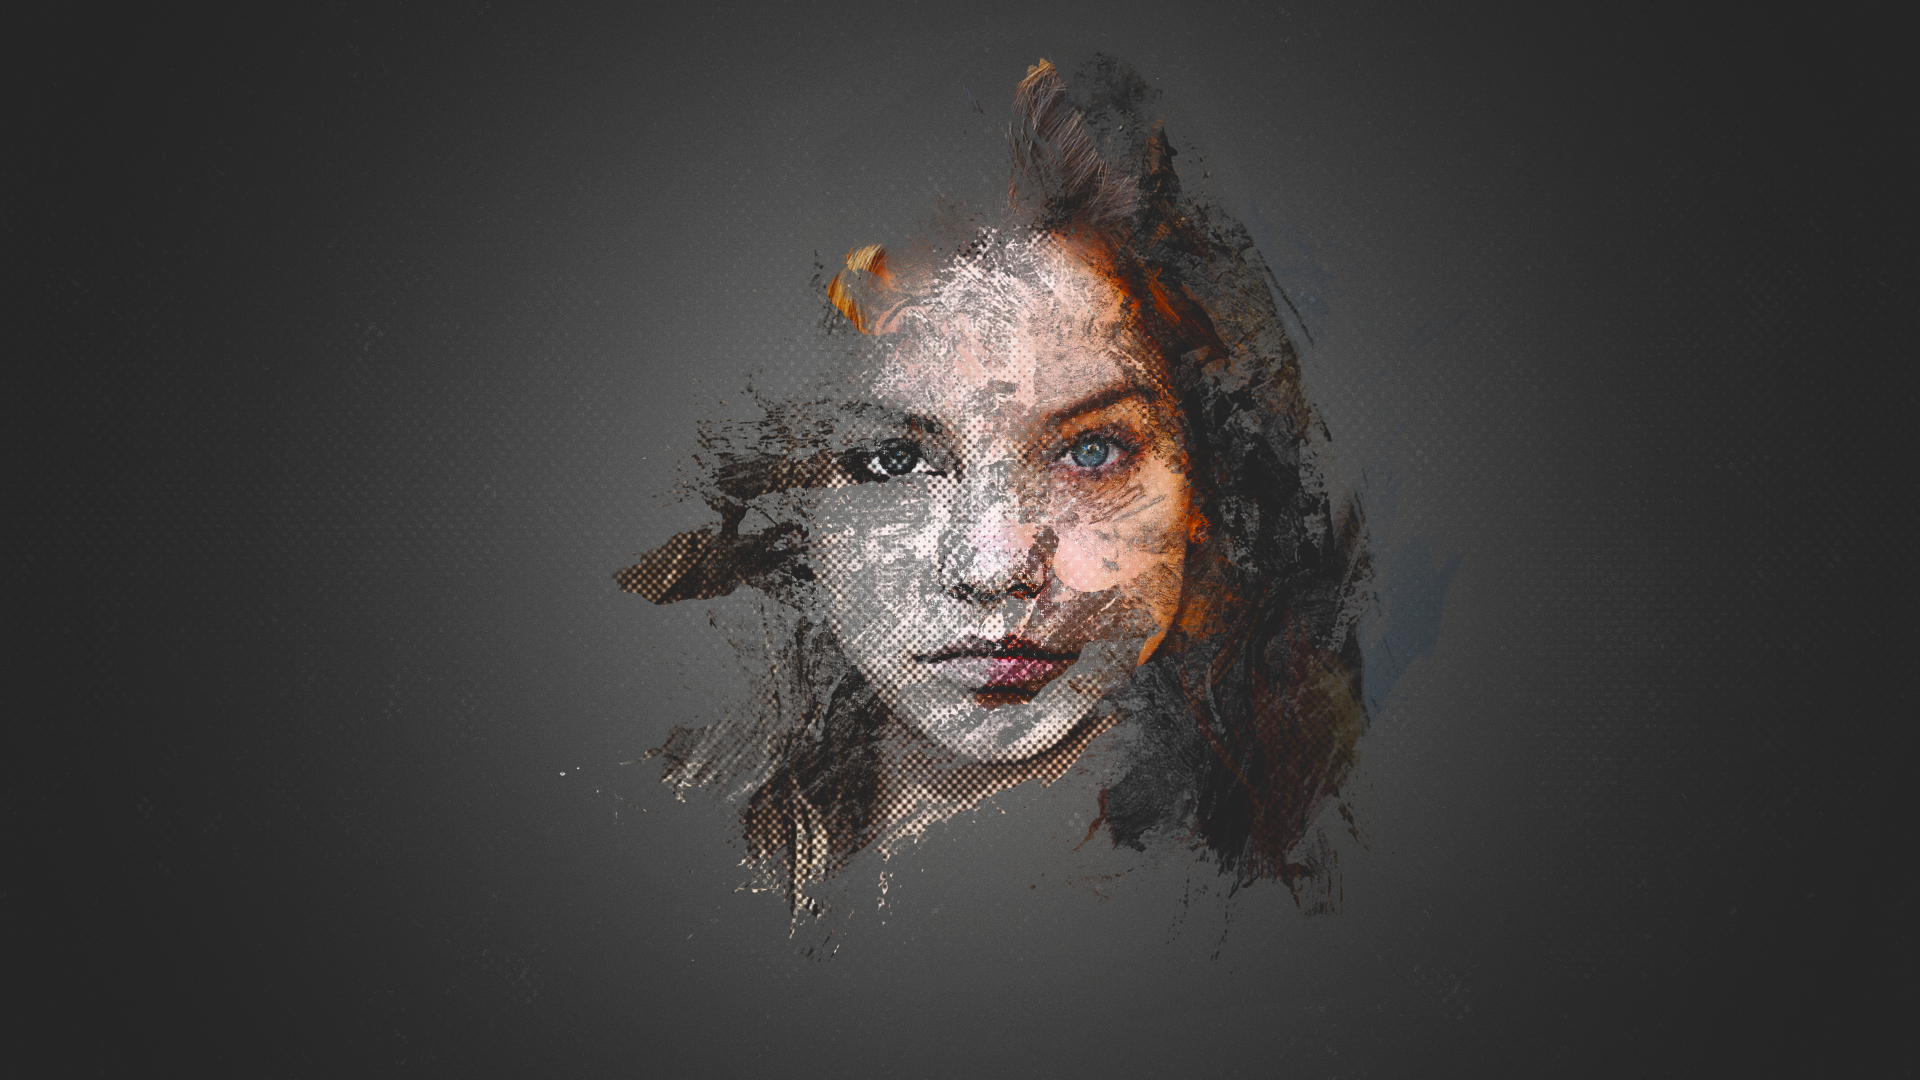 face, people, illustration, Photohop, portrait, eyes, Barbara Palvin, brush strokes, head, darkness, special effects Gallery HD Wallpaper